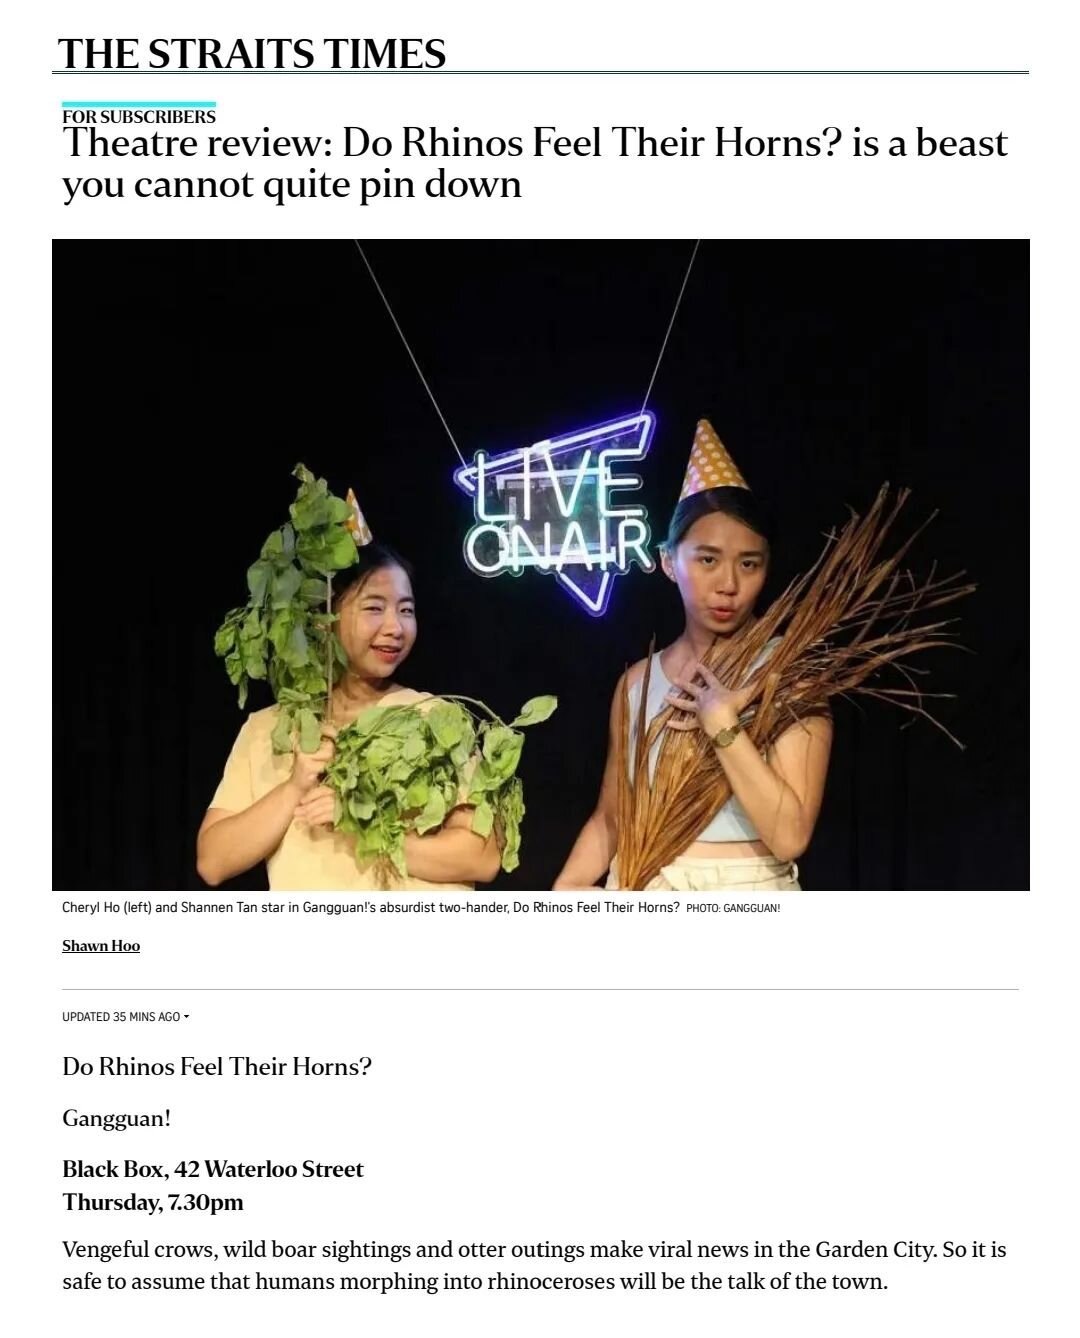 &quot;Do Rhinos Feel Their Horns?... is its own species of riotous fun and sneaky caricature.
&quot; @straits_times

We opened yesterday! Thanks for your comments and thoughts everyone! We really appreciate it.